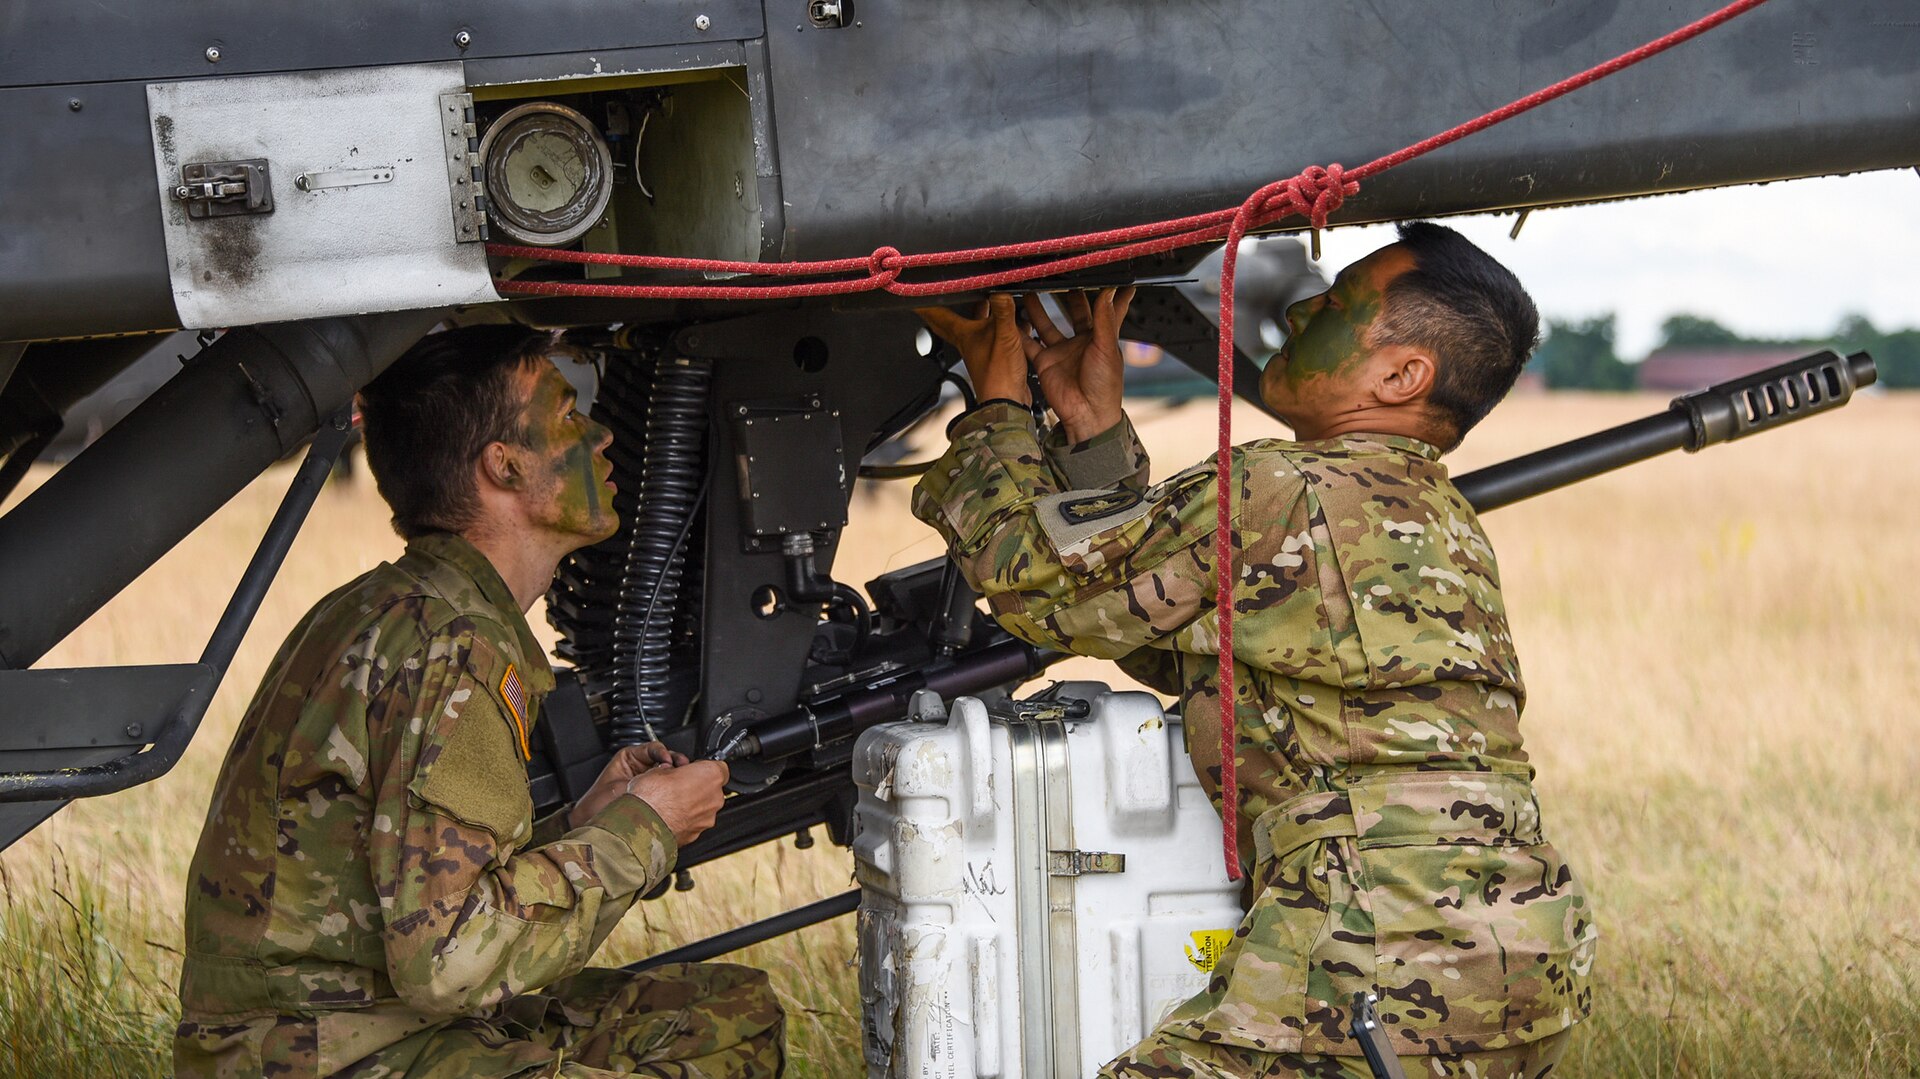 Army Sgt. Nathan Choi and Pfc. Matthew Hanneman from the 12th Combat Aviation Brigade conduct maintenance on AH-64 Apache helicopter during Saber Strike 2018 at Bemowo Piskie Training Area in Orzysz, Poland. DLA equipped exercise participants with everything from repair parts to fuel.